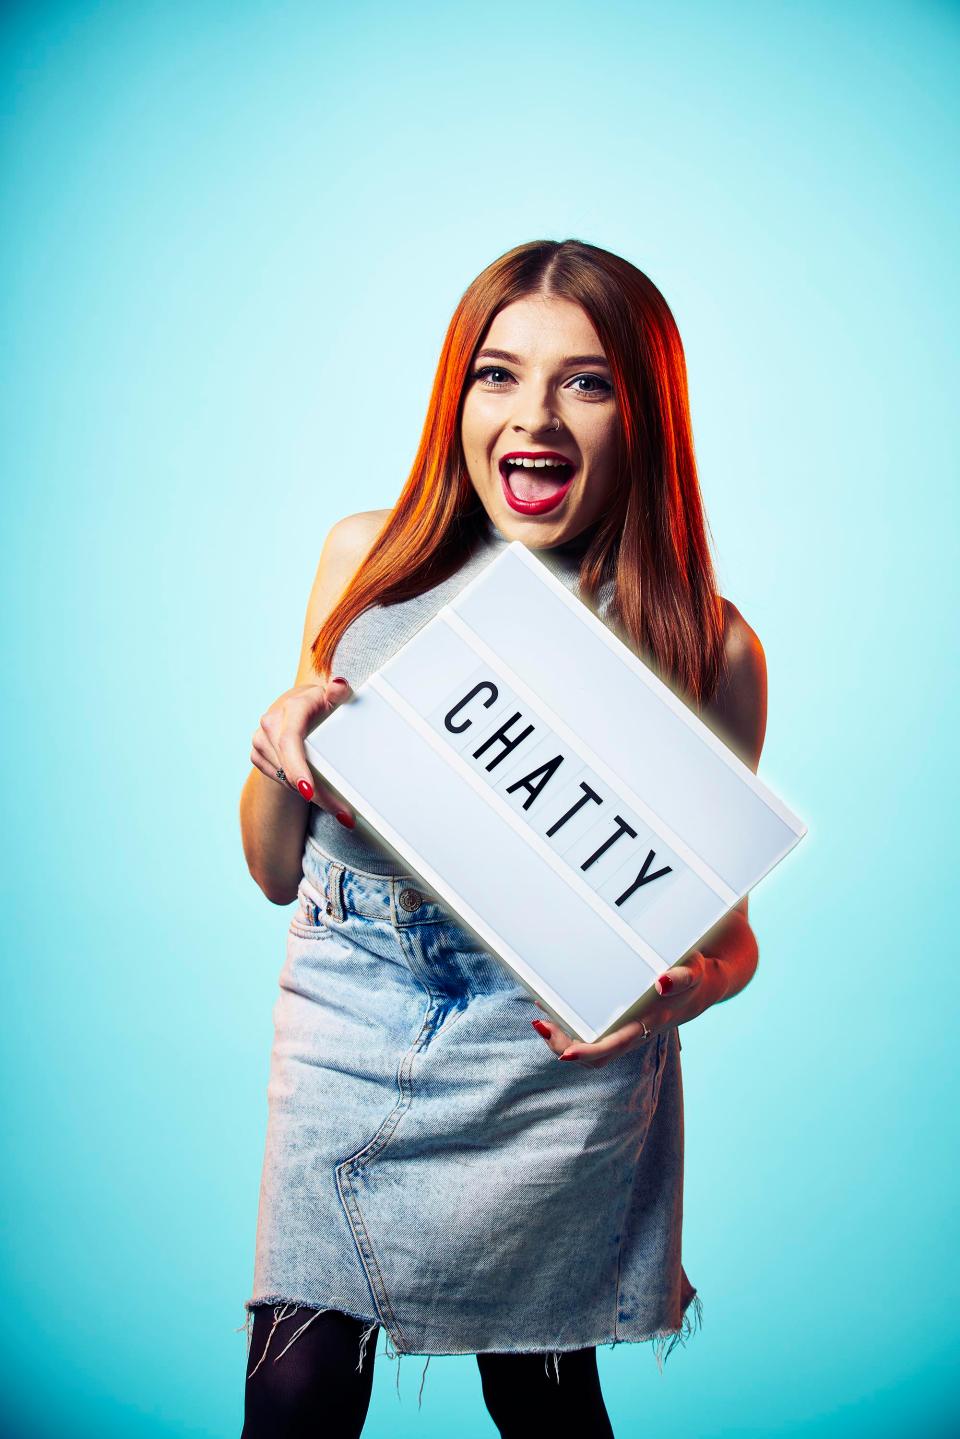 Becky Dann of The Undateables stands holiding a sign with the word 'Chatty'